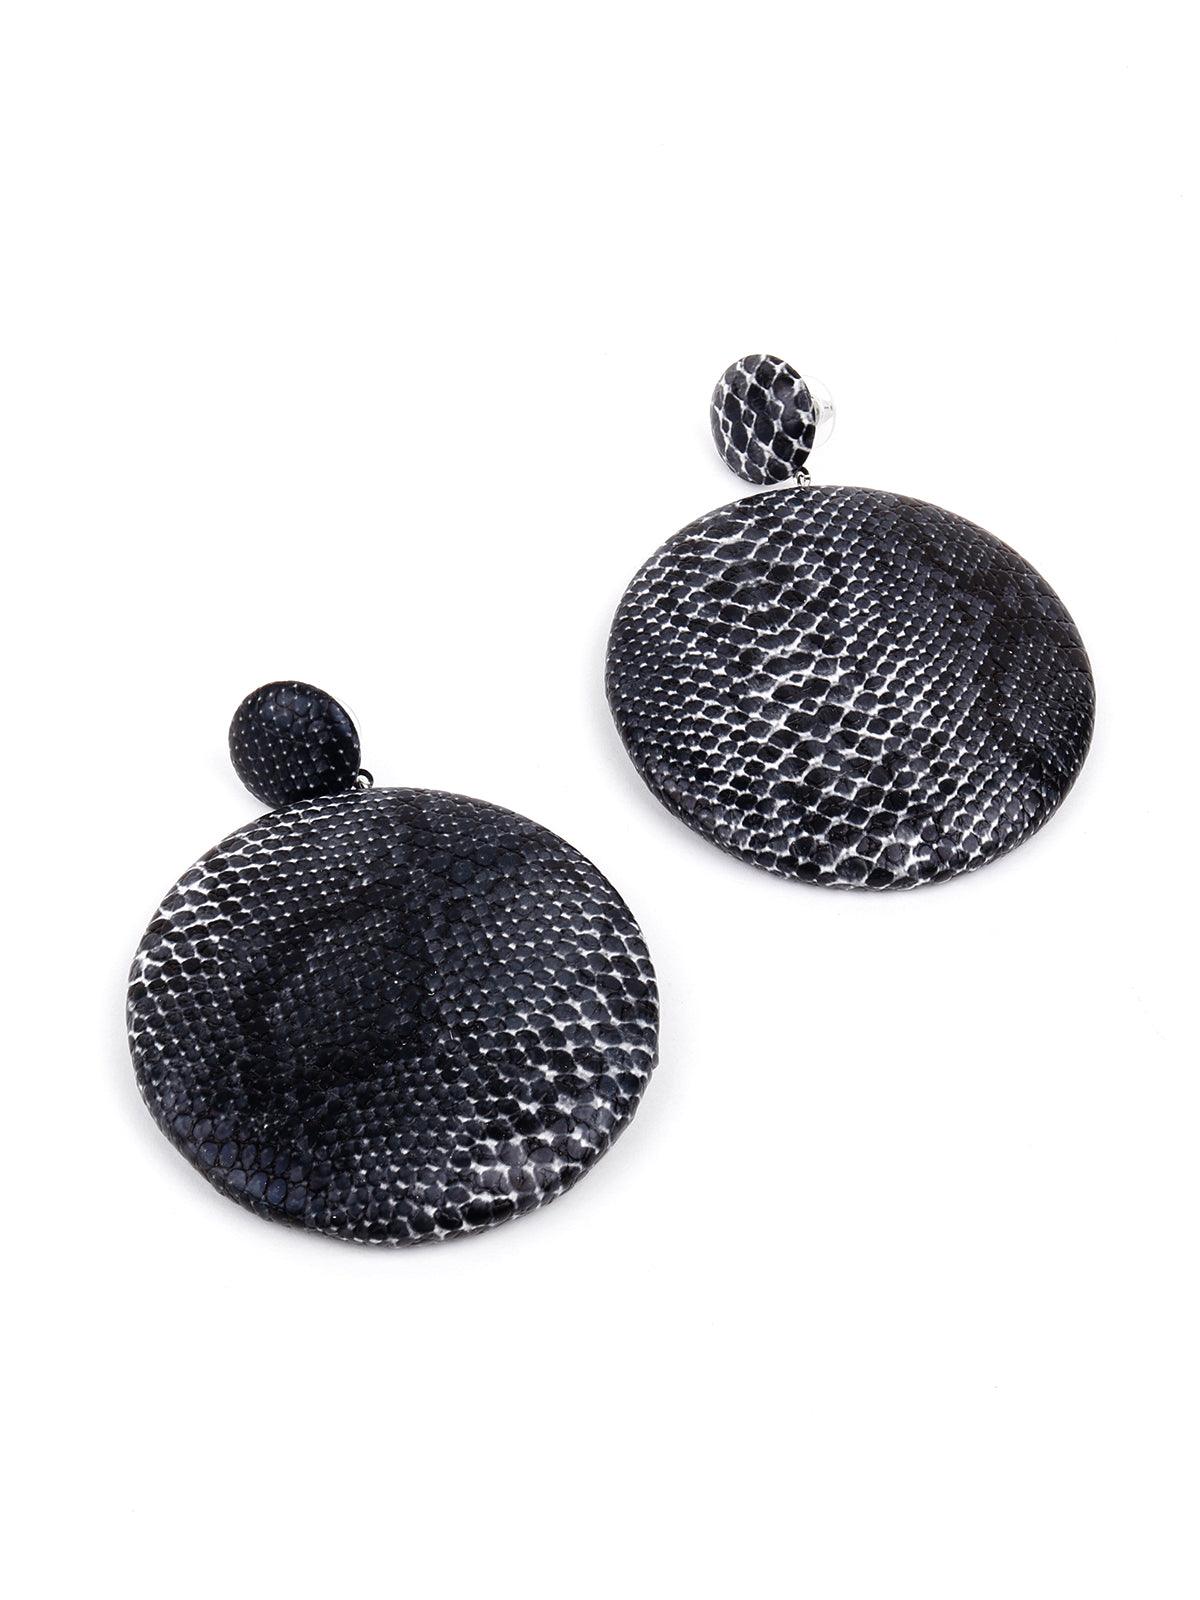 Exquisite black and white croc printed rounded earrings - Odette